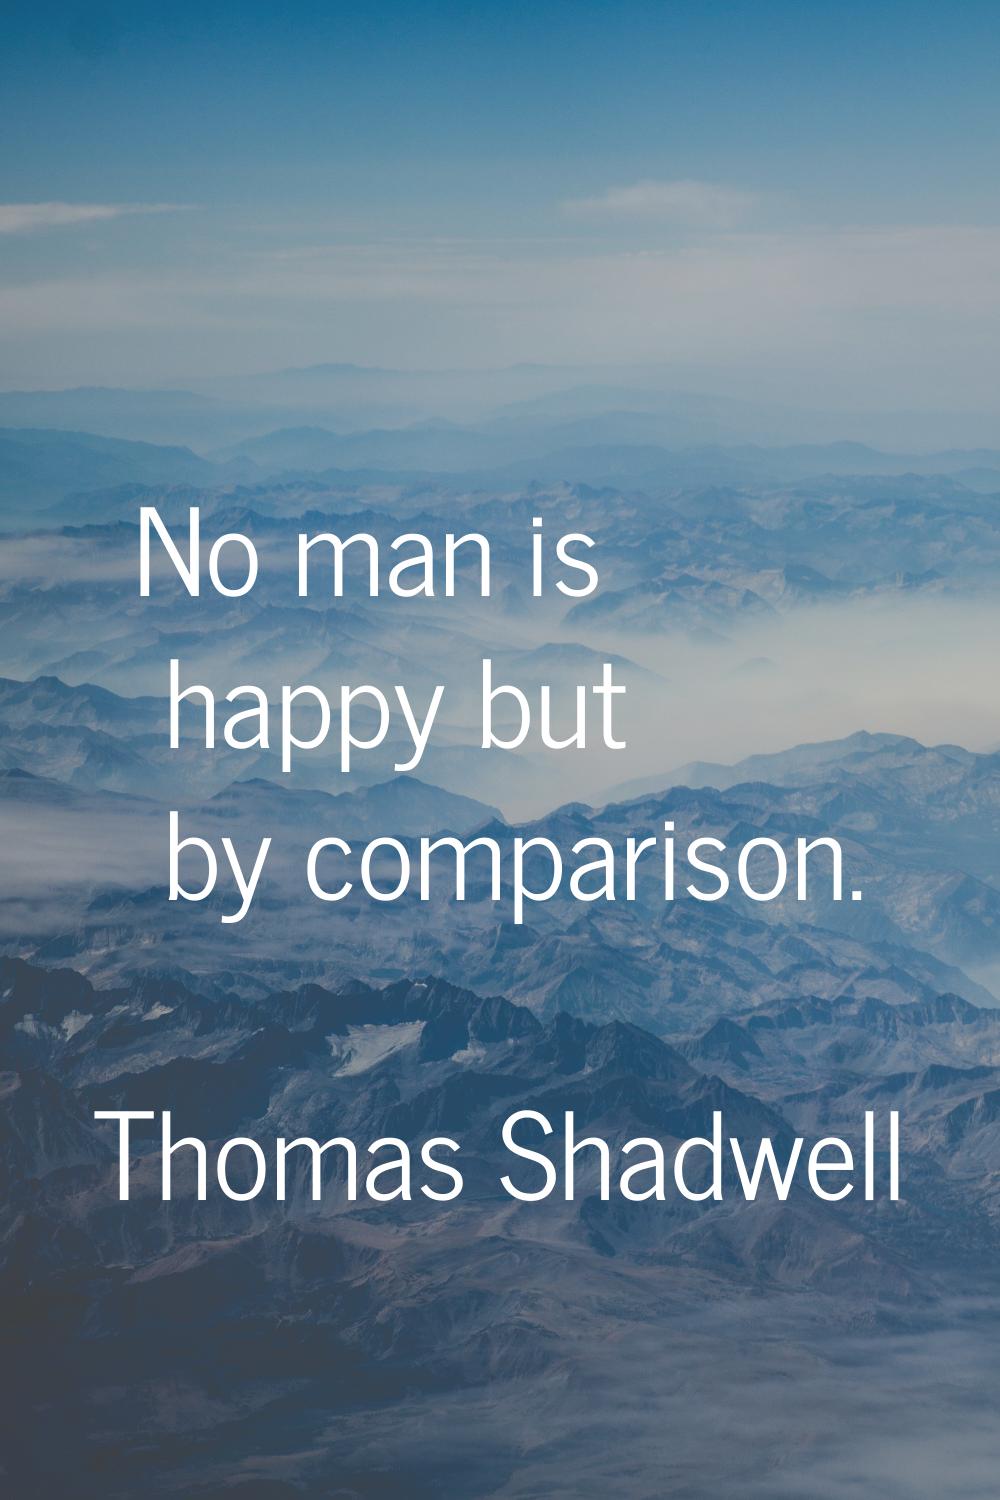 No man is happy but by comparison.